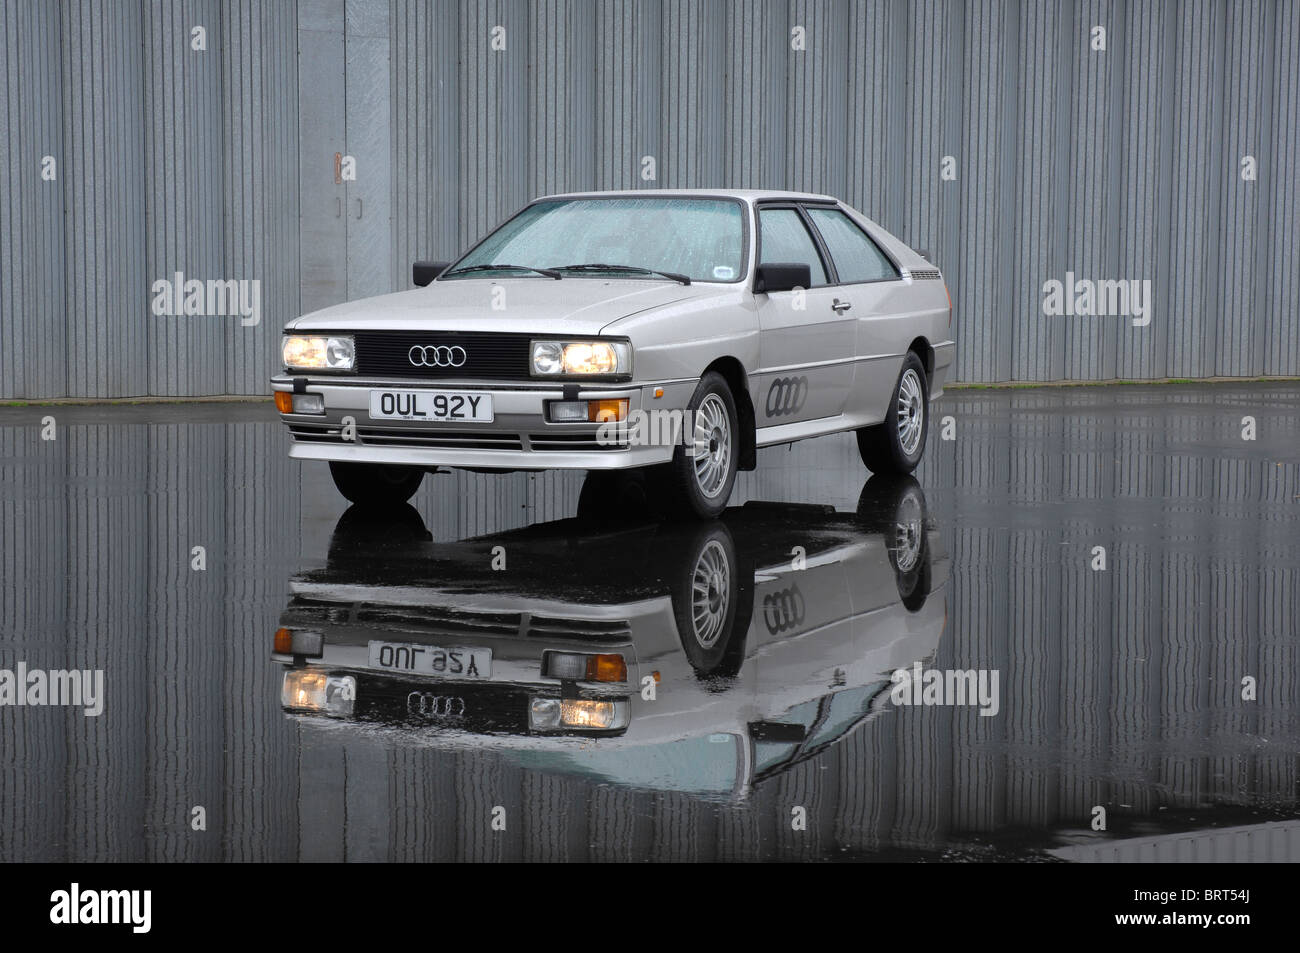 Audi Quattro High Resolution Stock Photography And Images Alamy